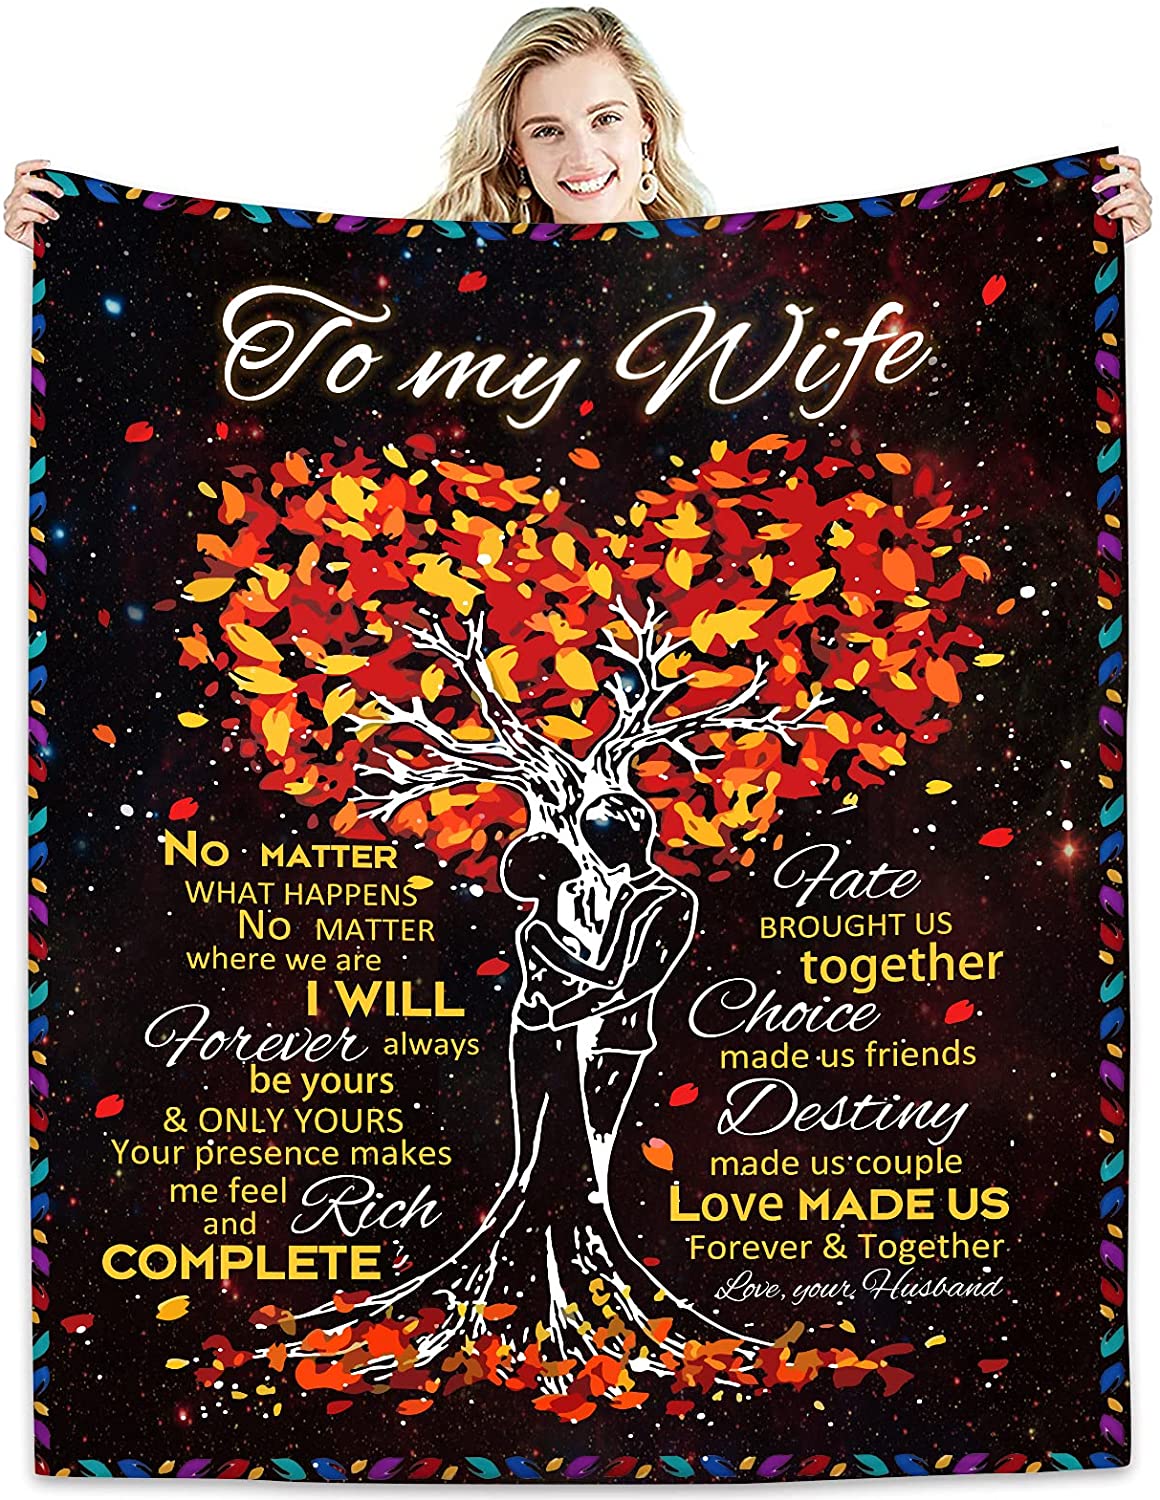 To My Wife Tree Heart Blanket, To My Wife Blanket from Husband, Romantic Valentine Anniversary Birthday Gift for Wife, Soft Warm Lightweight Fleece Throw Blanket, Best Gift Ideas For Wife